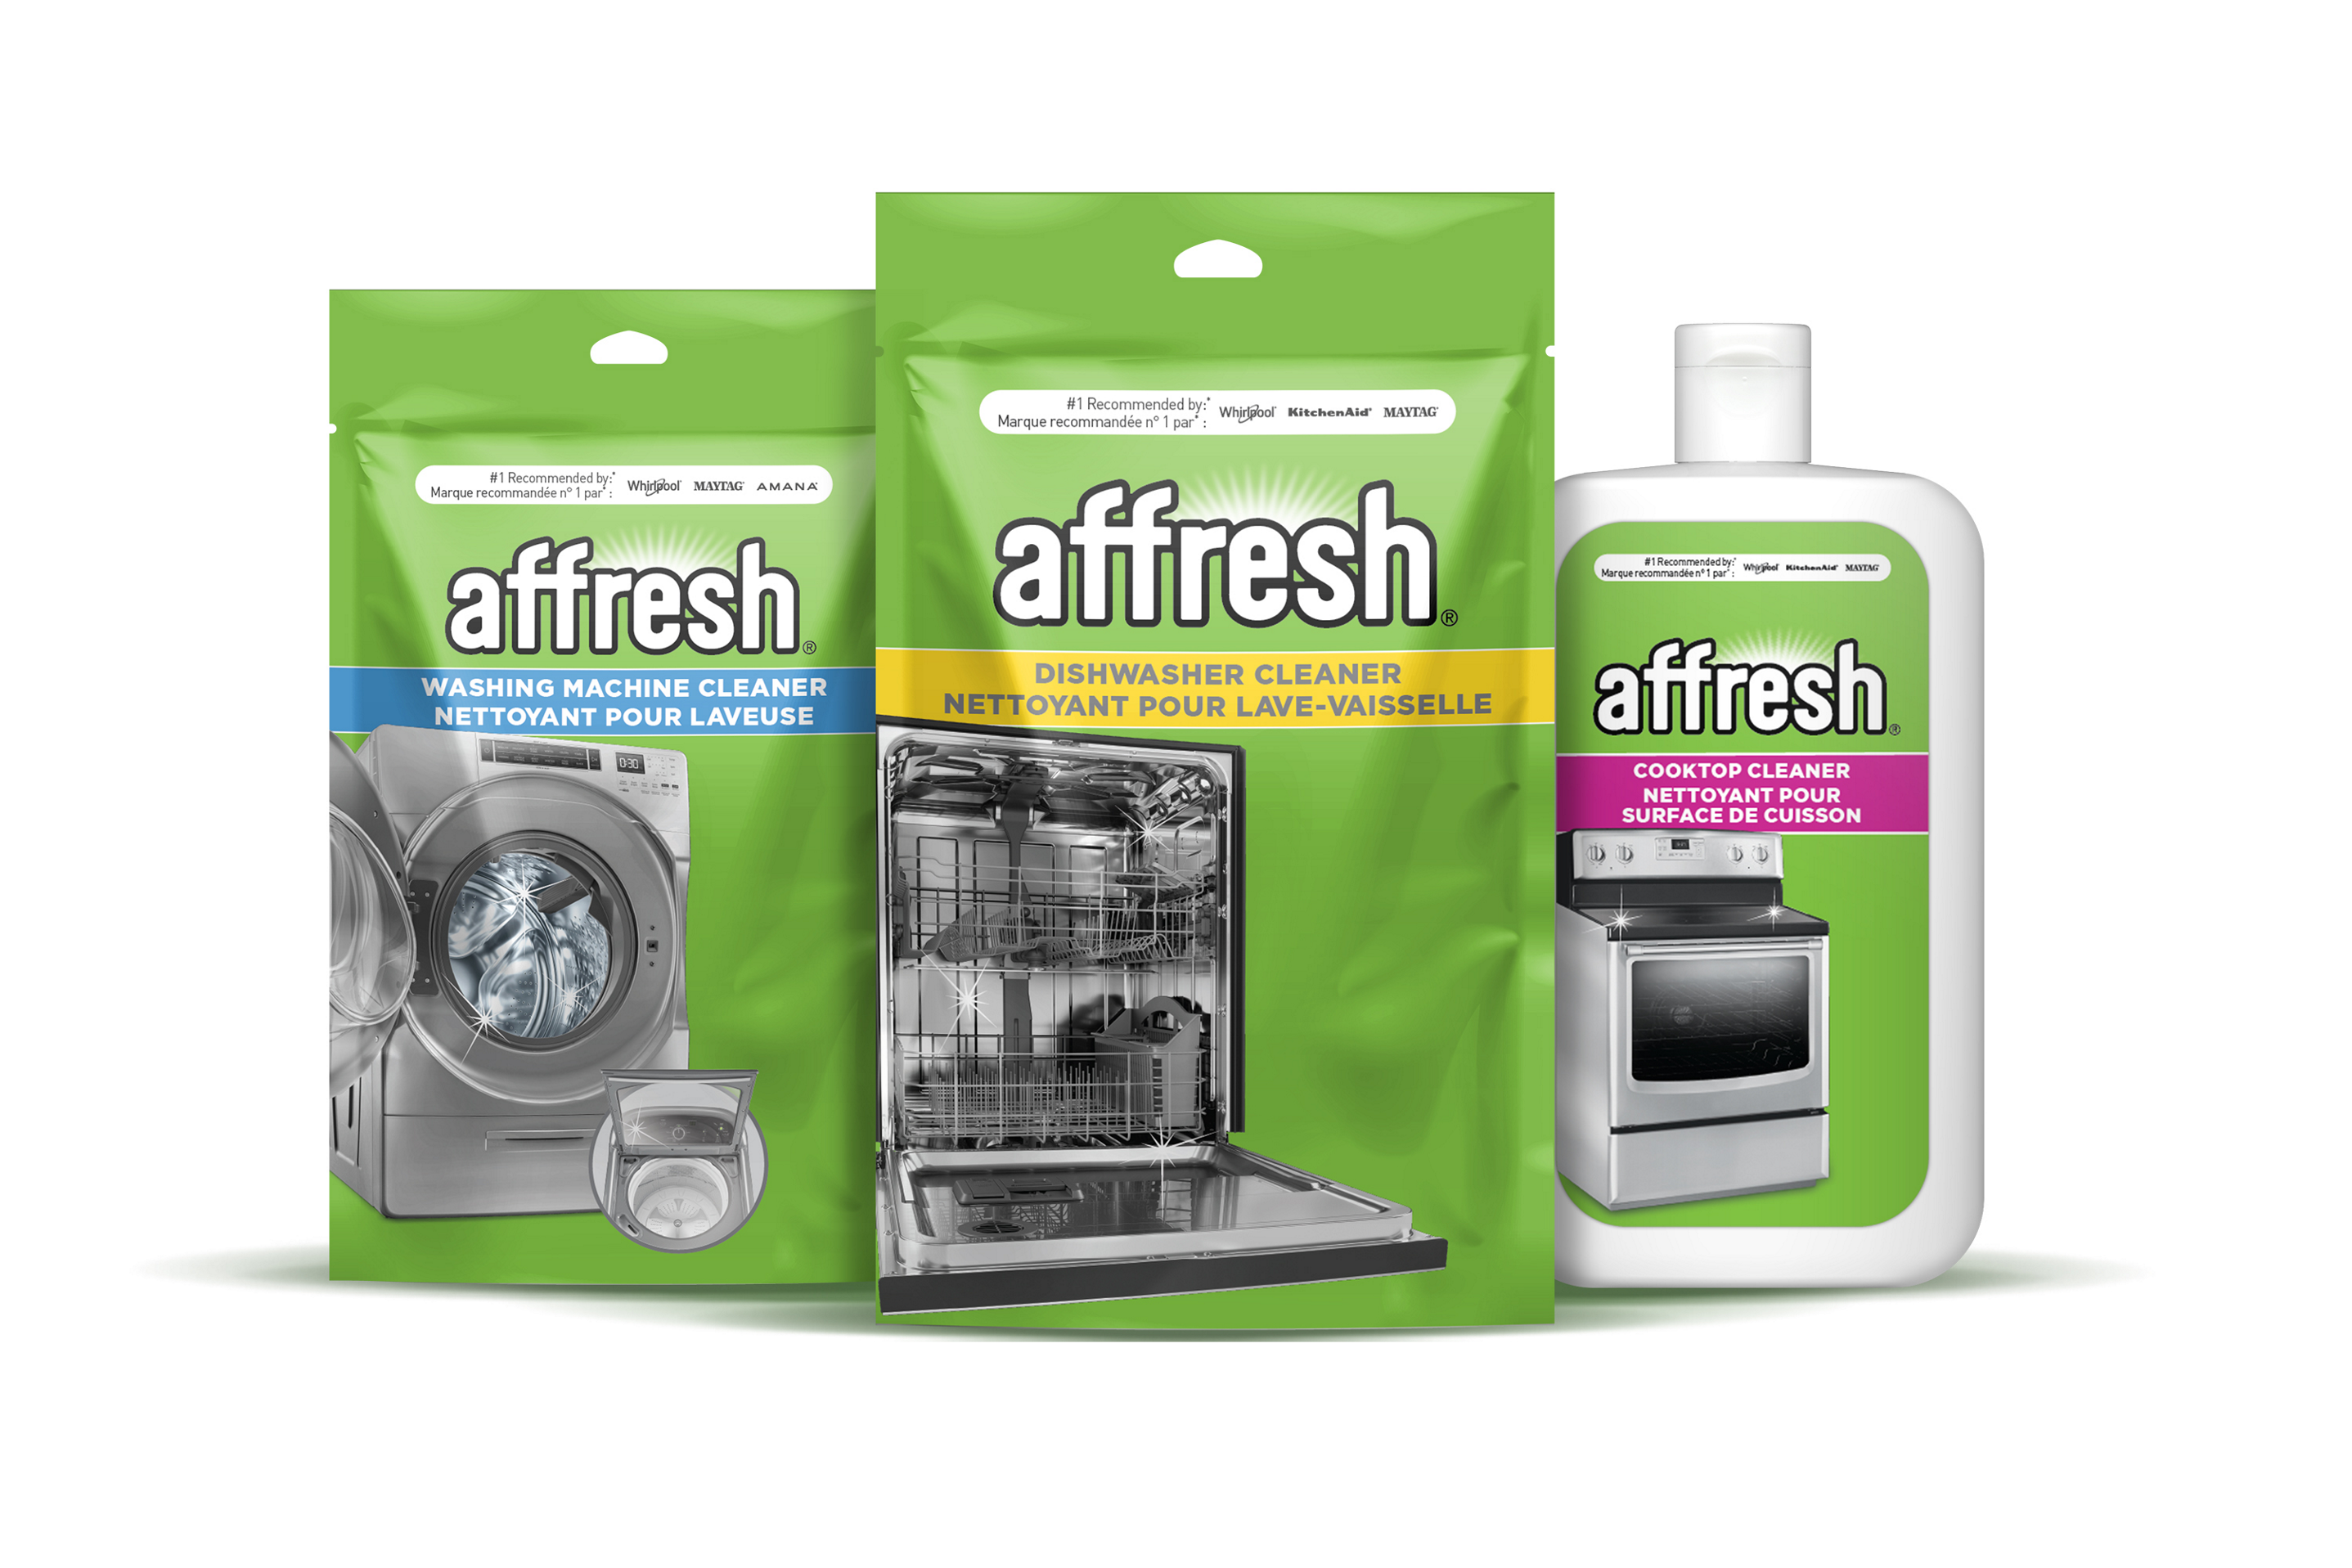 Three packages of affresh products: affresh Washing Machine Cleaner, affresh Dishwasher Cleaner and a bottle of affresh Cooktop Cleaner